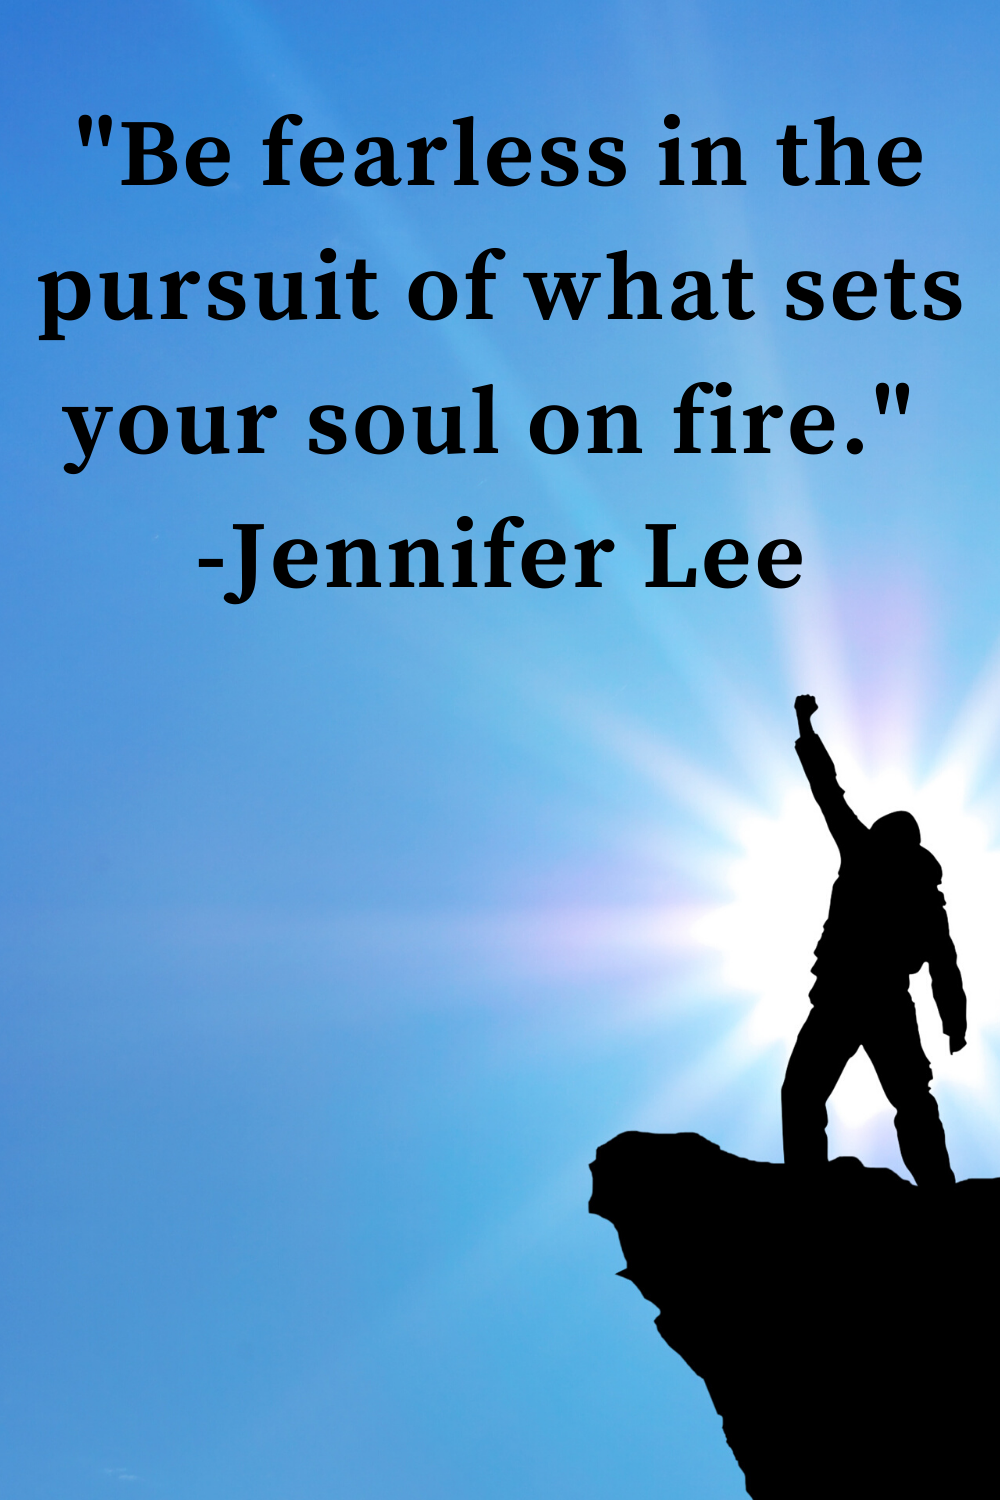 Motivational Quote -- Be fearless in the pursuit of what sets you soul on fire.